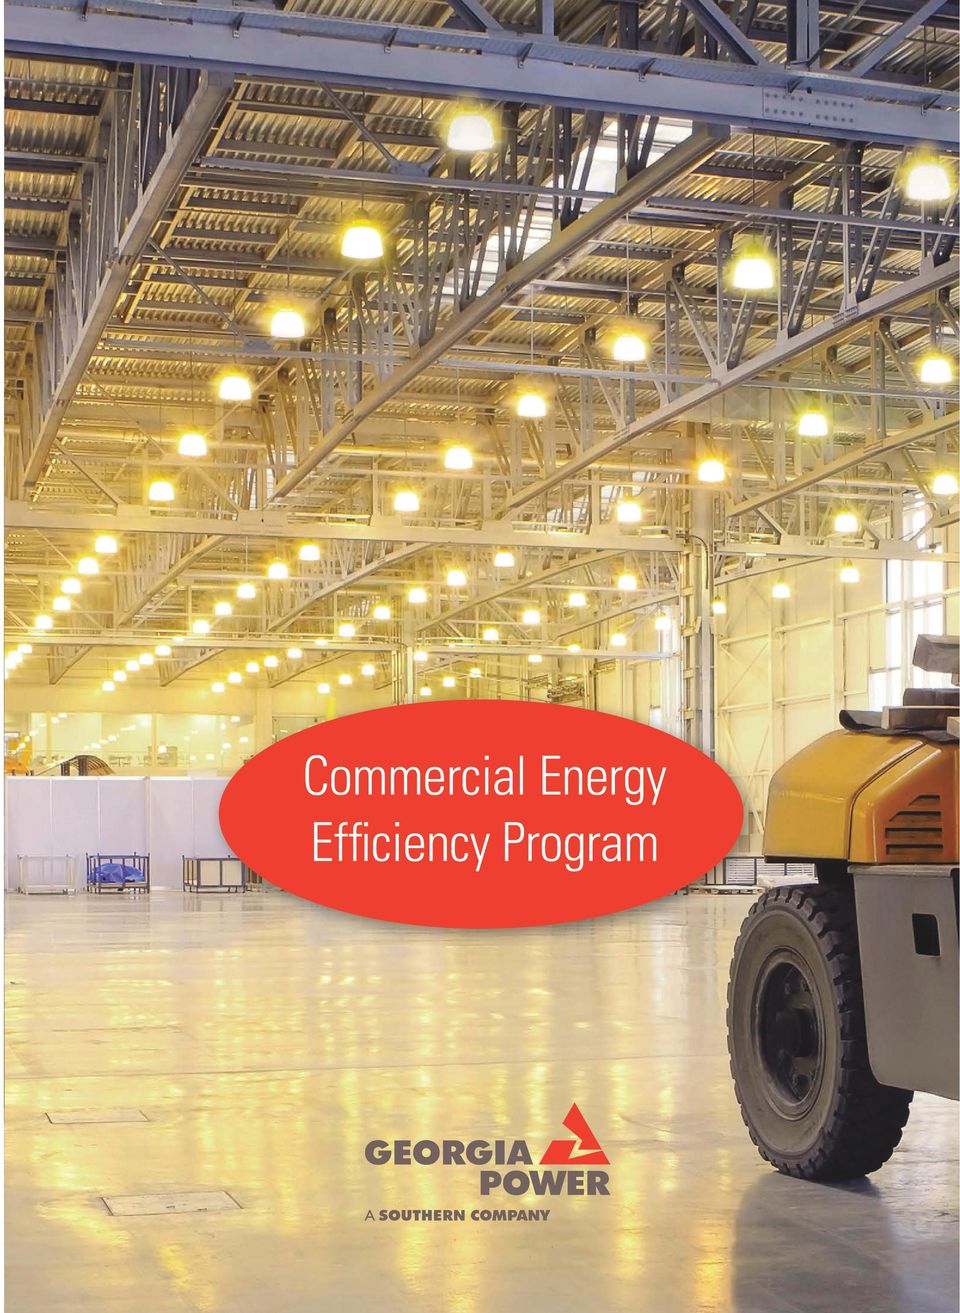 Available incentives help you reduce the cost to install high-efficiency equipment, resulting in lower energy use and costs.